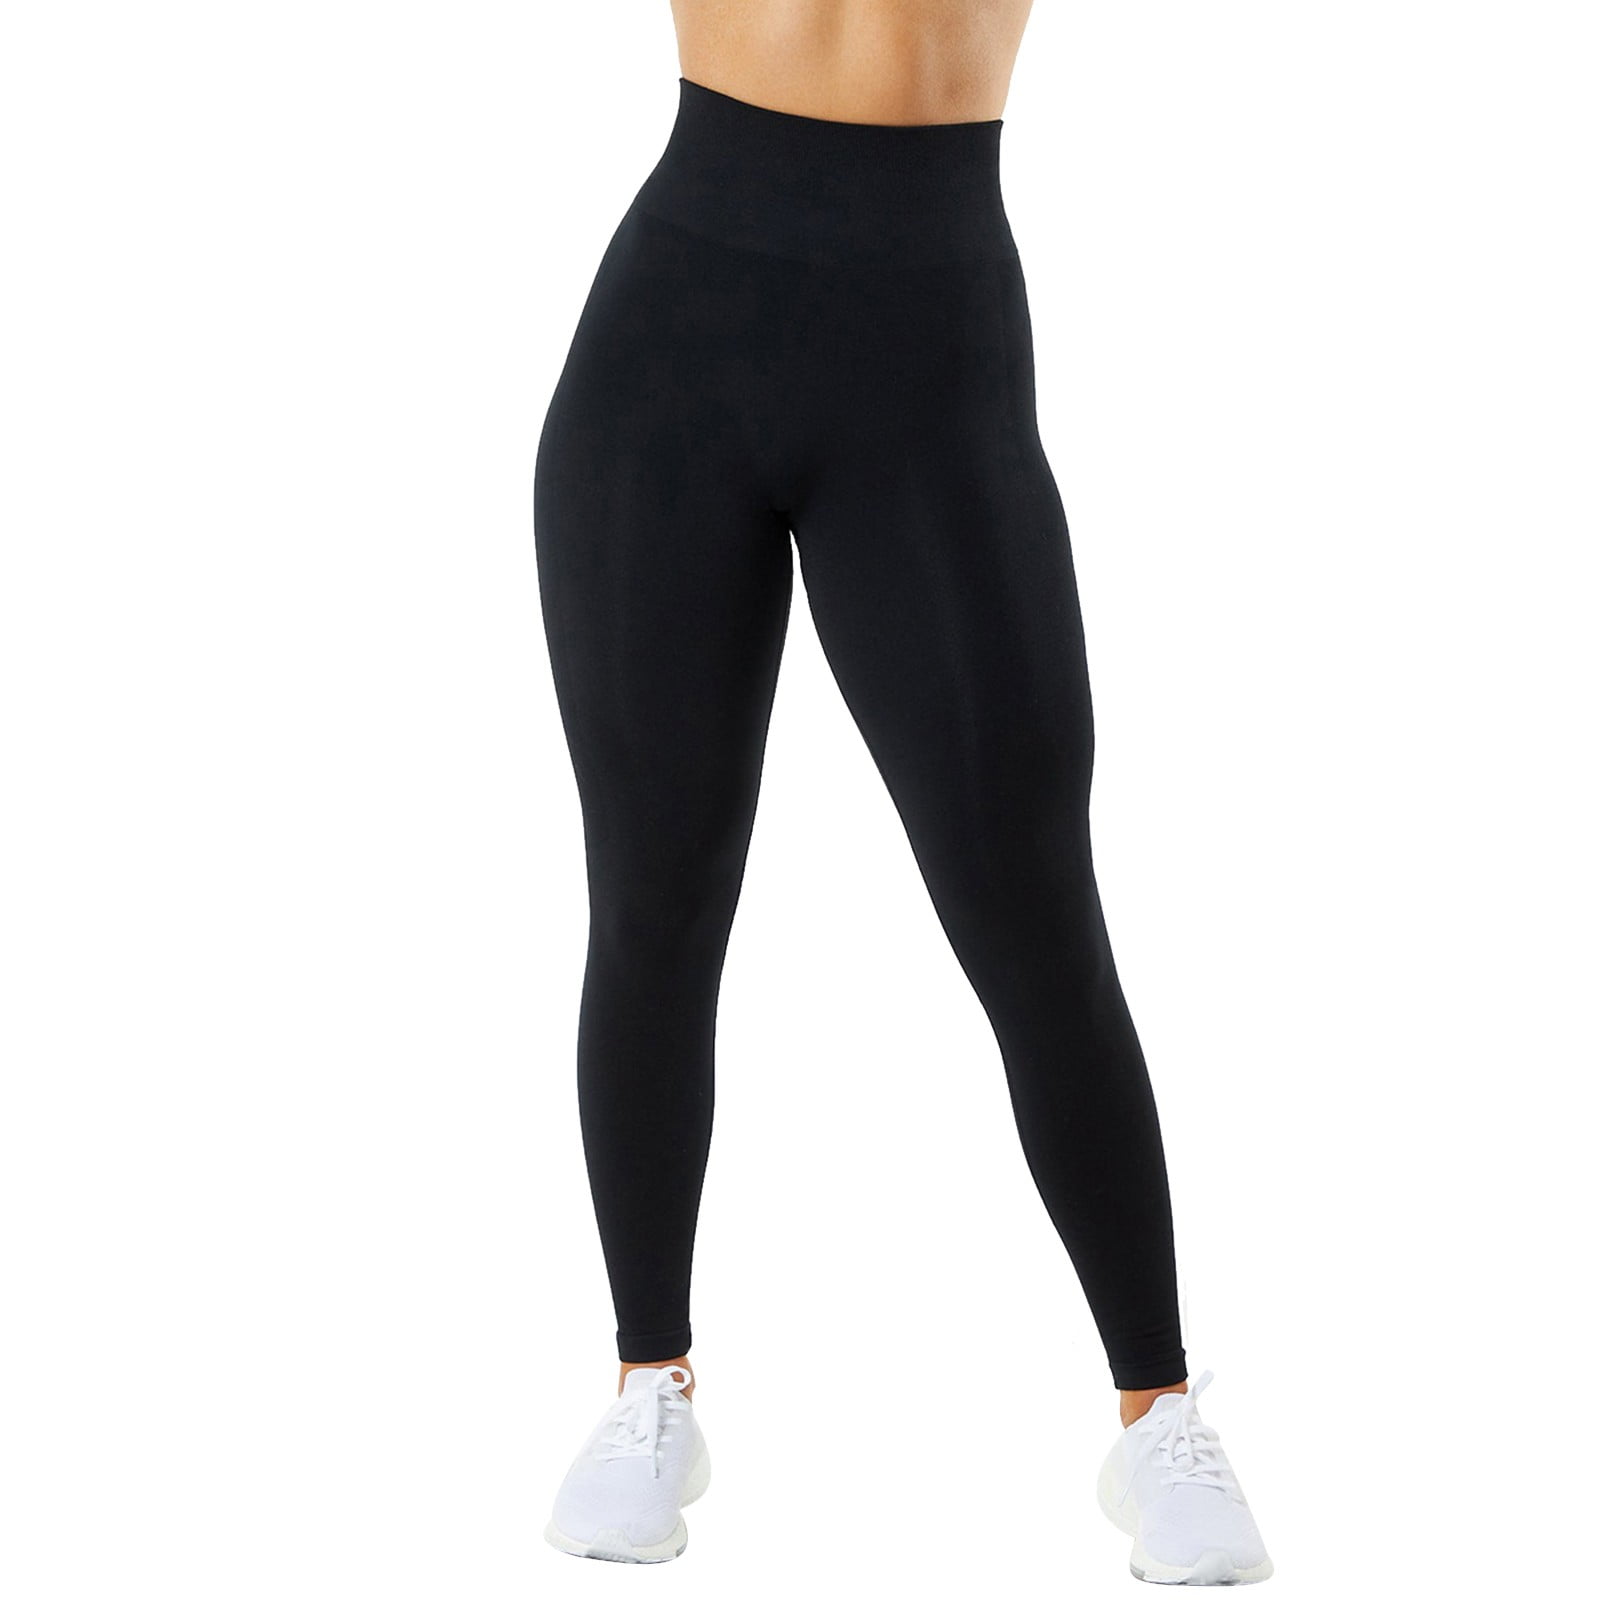 xinqinghao yoga leggings for women women's seamless tight high waisted  elastic quick dry breathable exercise pants yoga pants women yoga pants  black l 